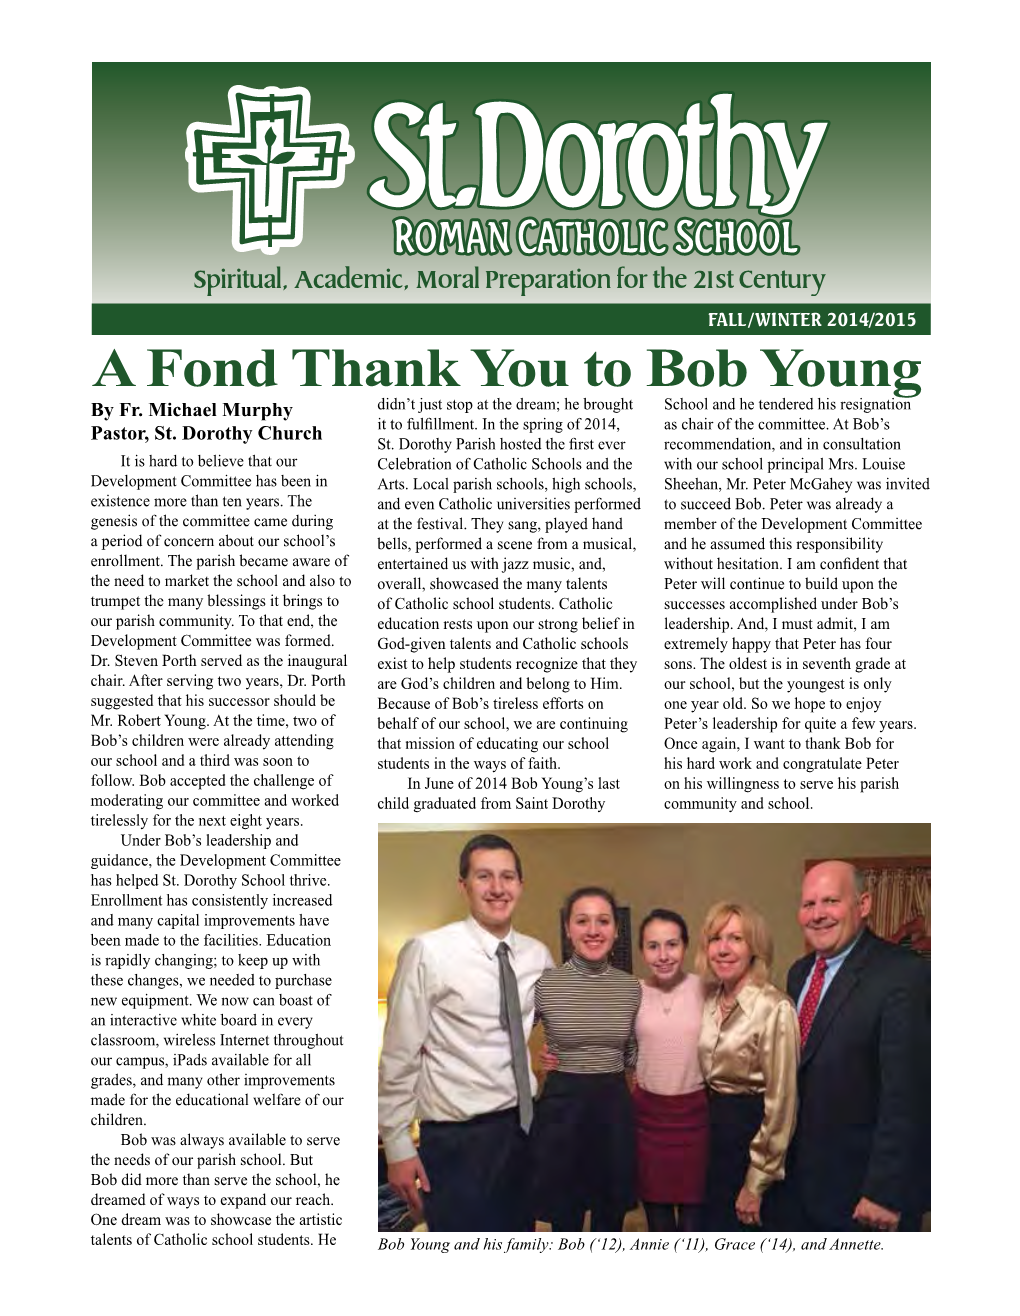 A Fond Thank You to Bob Young by Fr